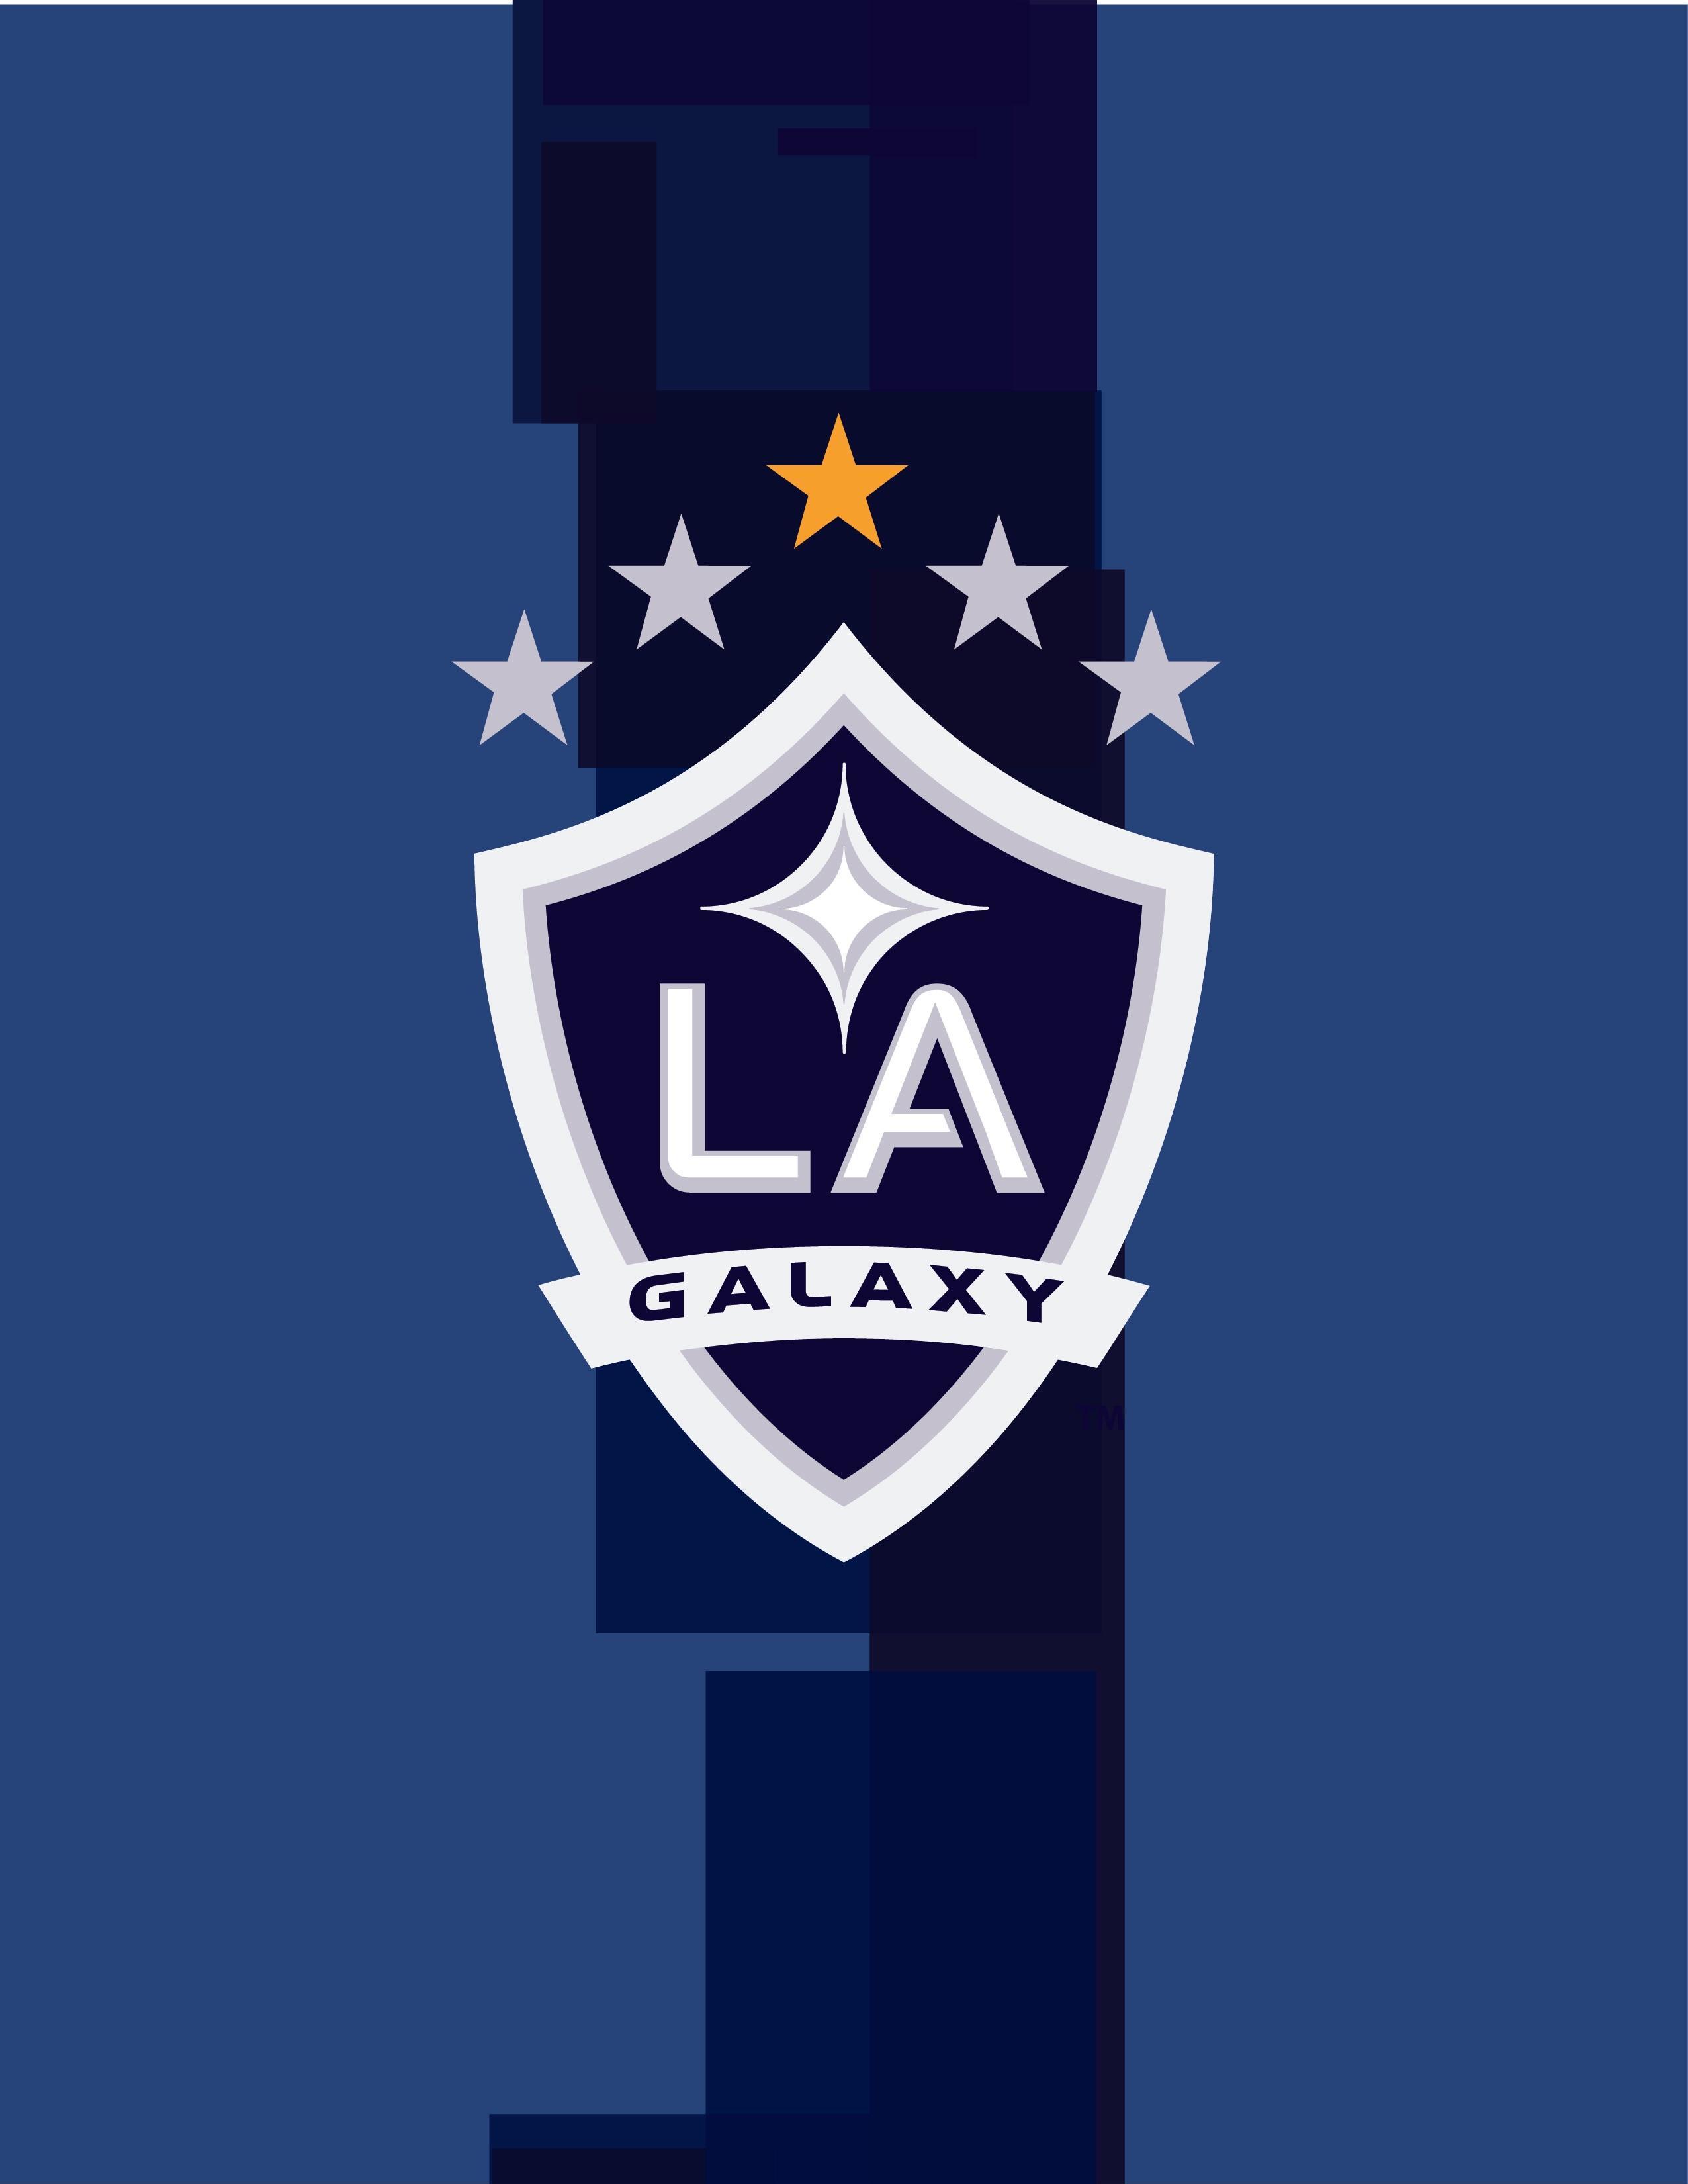 I Made A Wallpaper For The Away Jersey R Lagalaxy